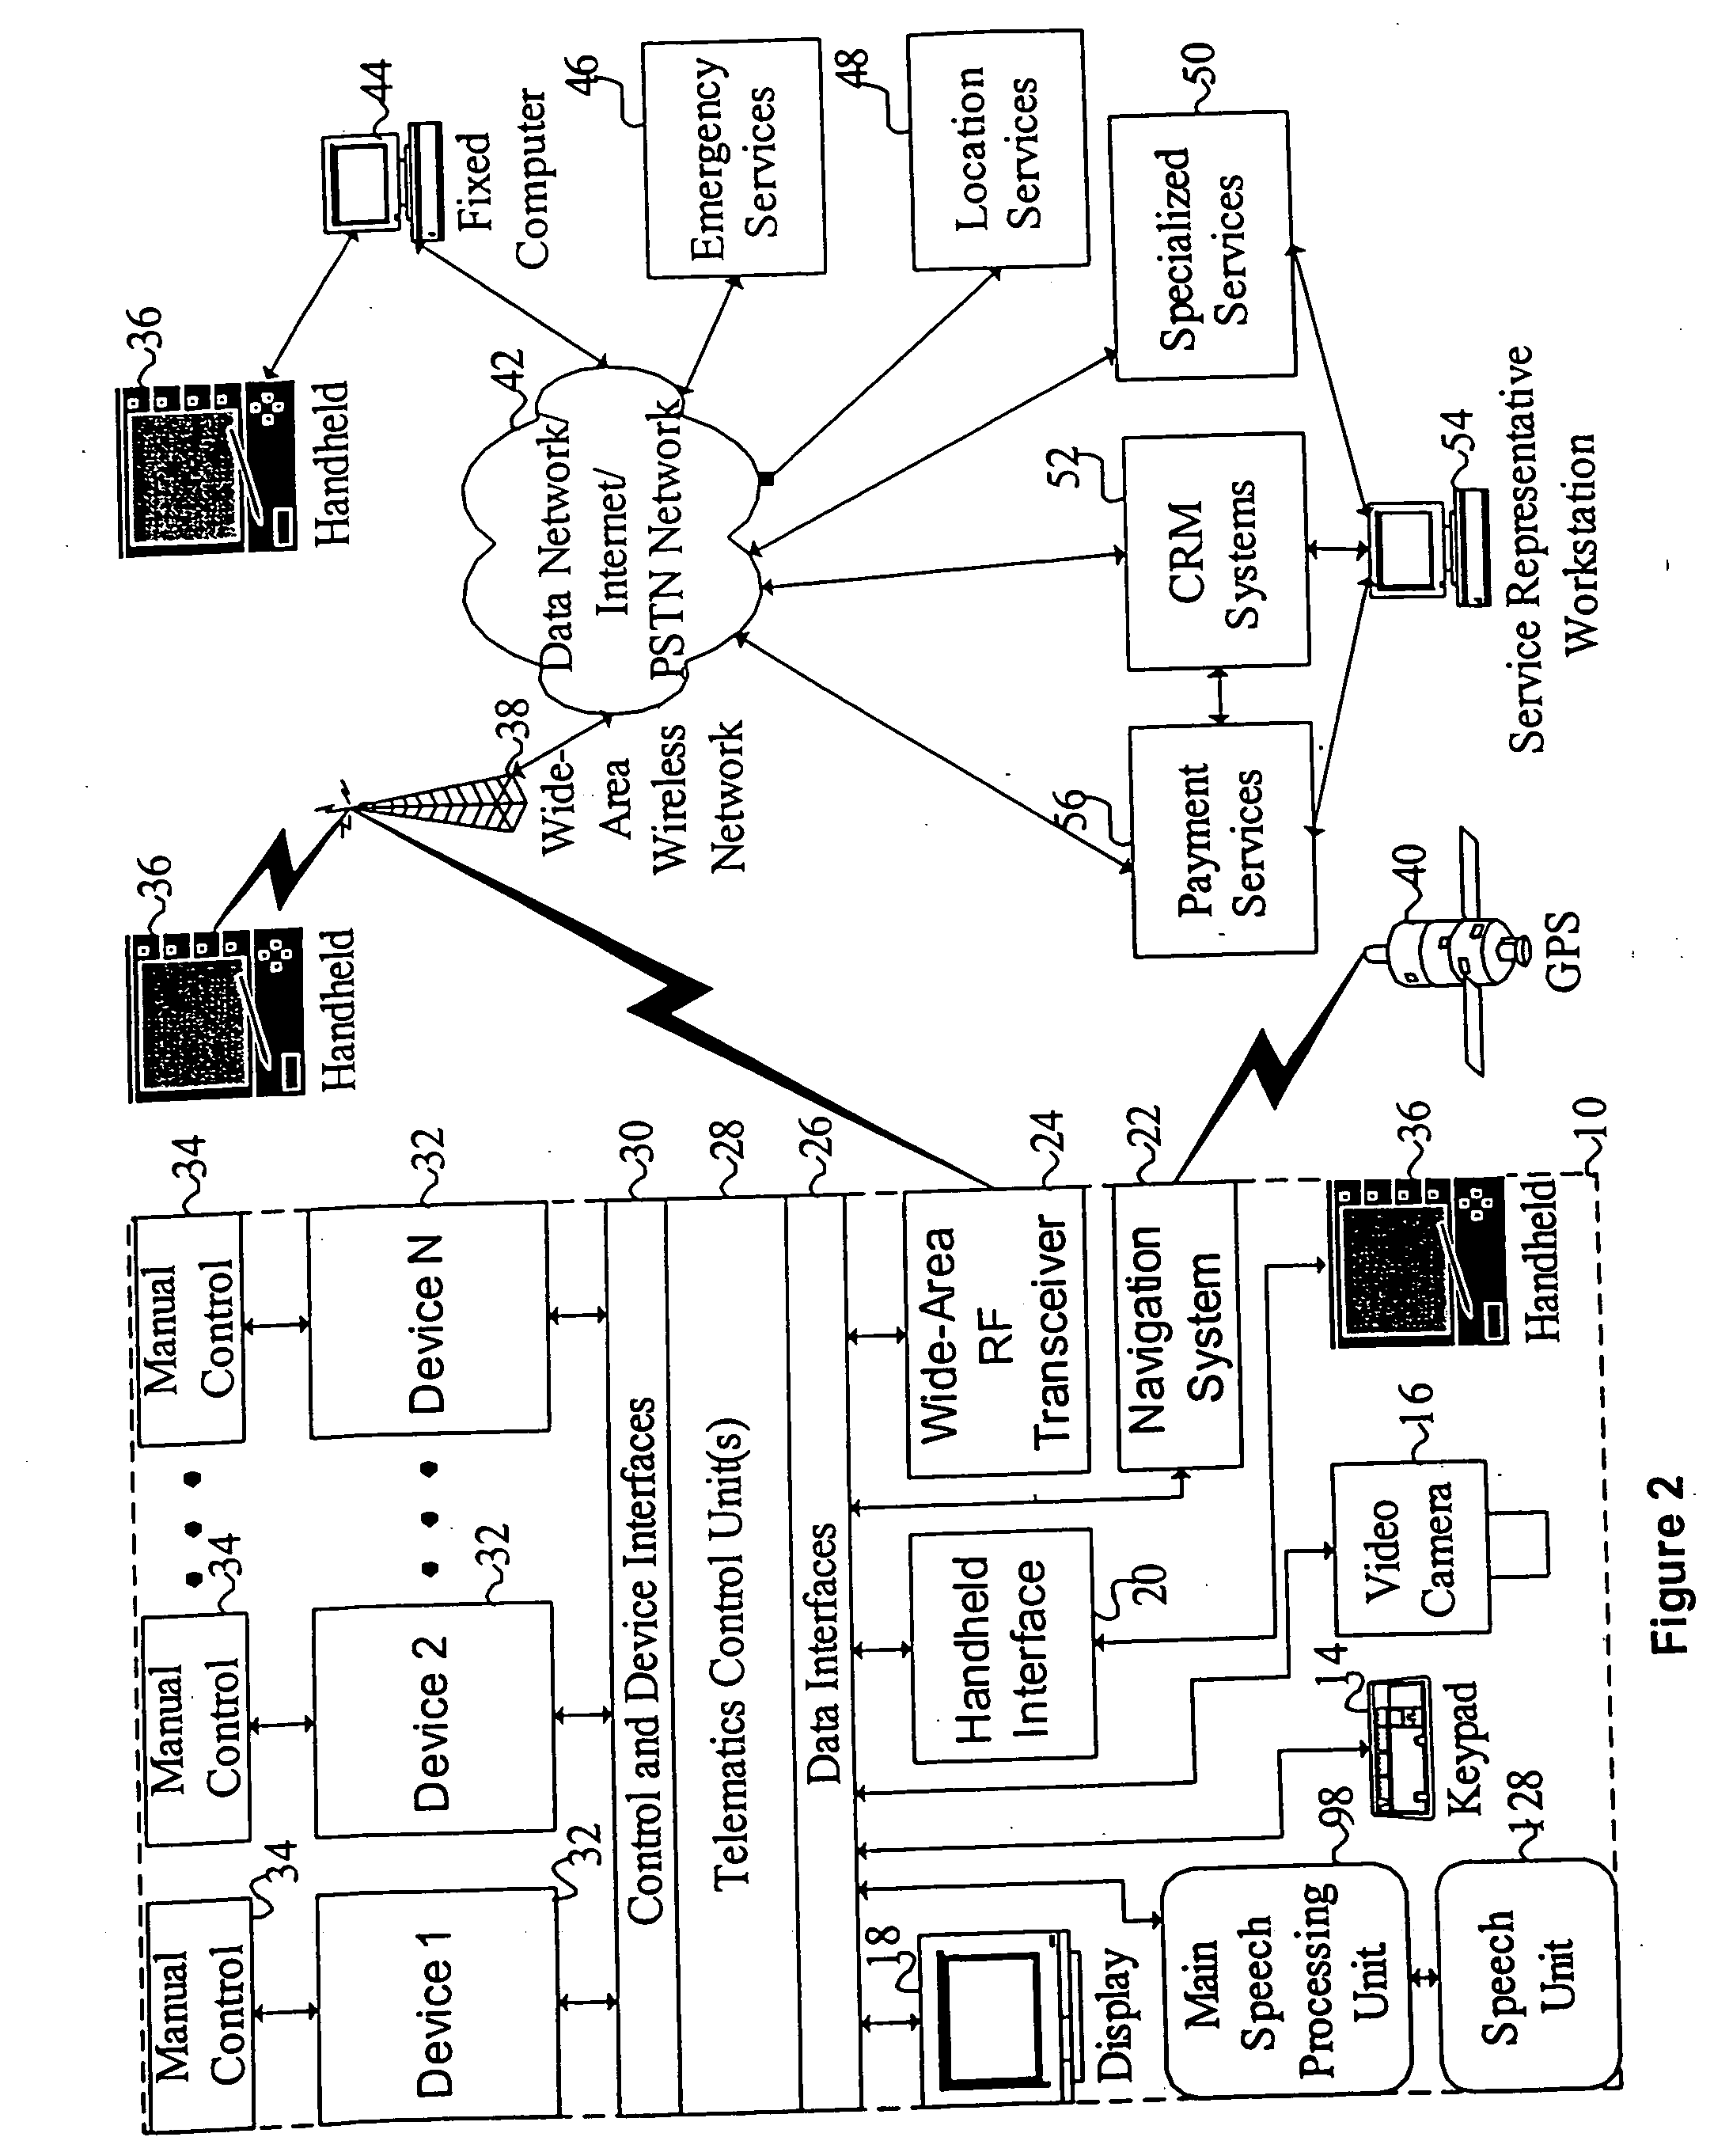 Mobile systems and methods of supporting natural language human-machine interactions